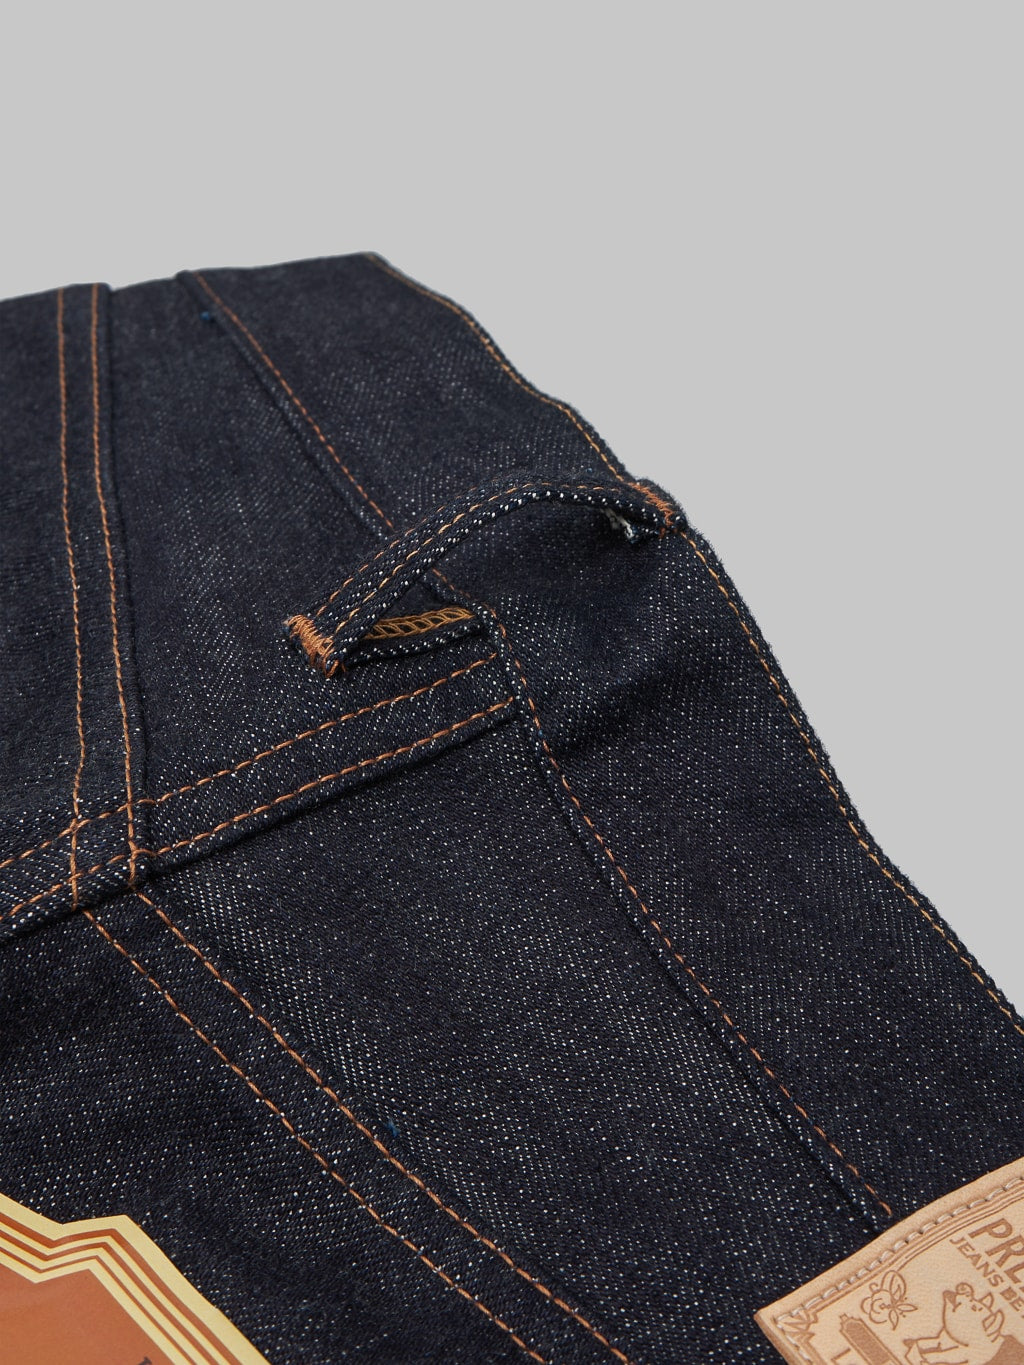 Studio dartisan suvin gold relaxed tapered jeans belt loop